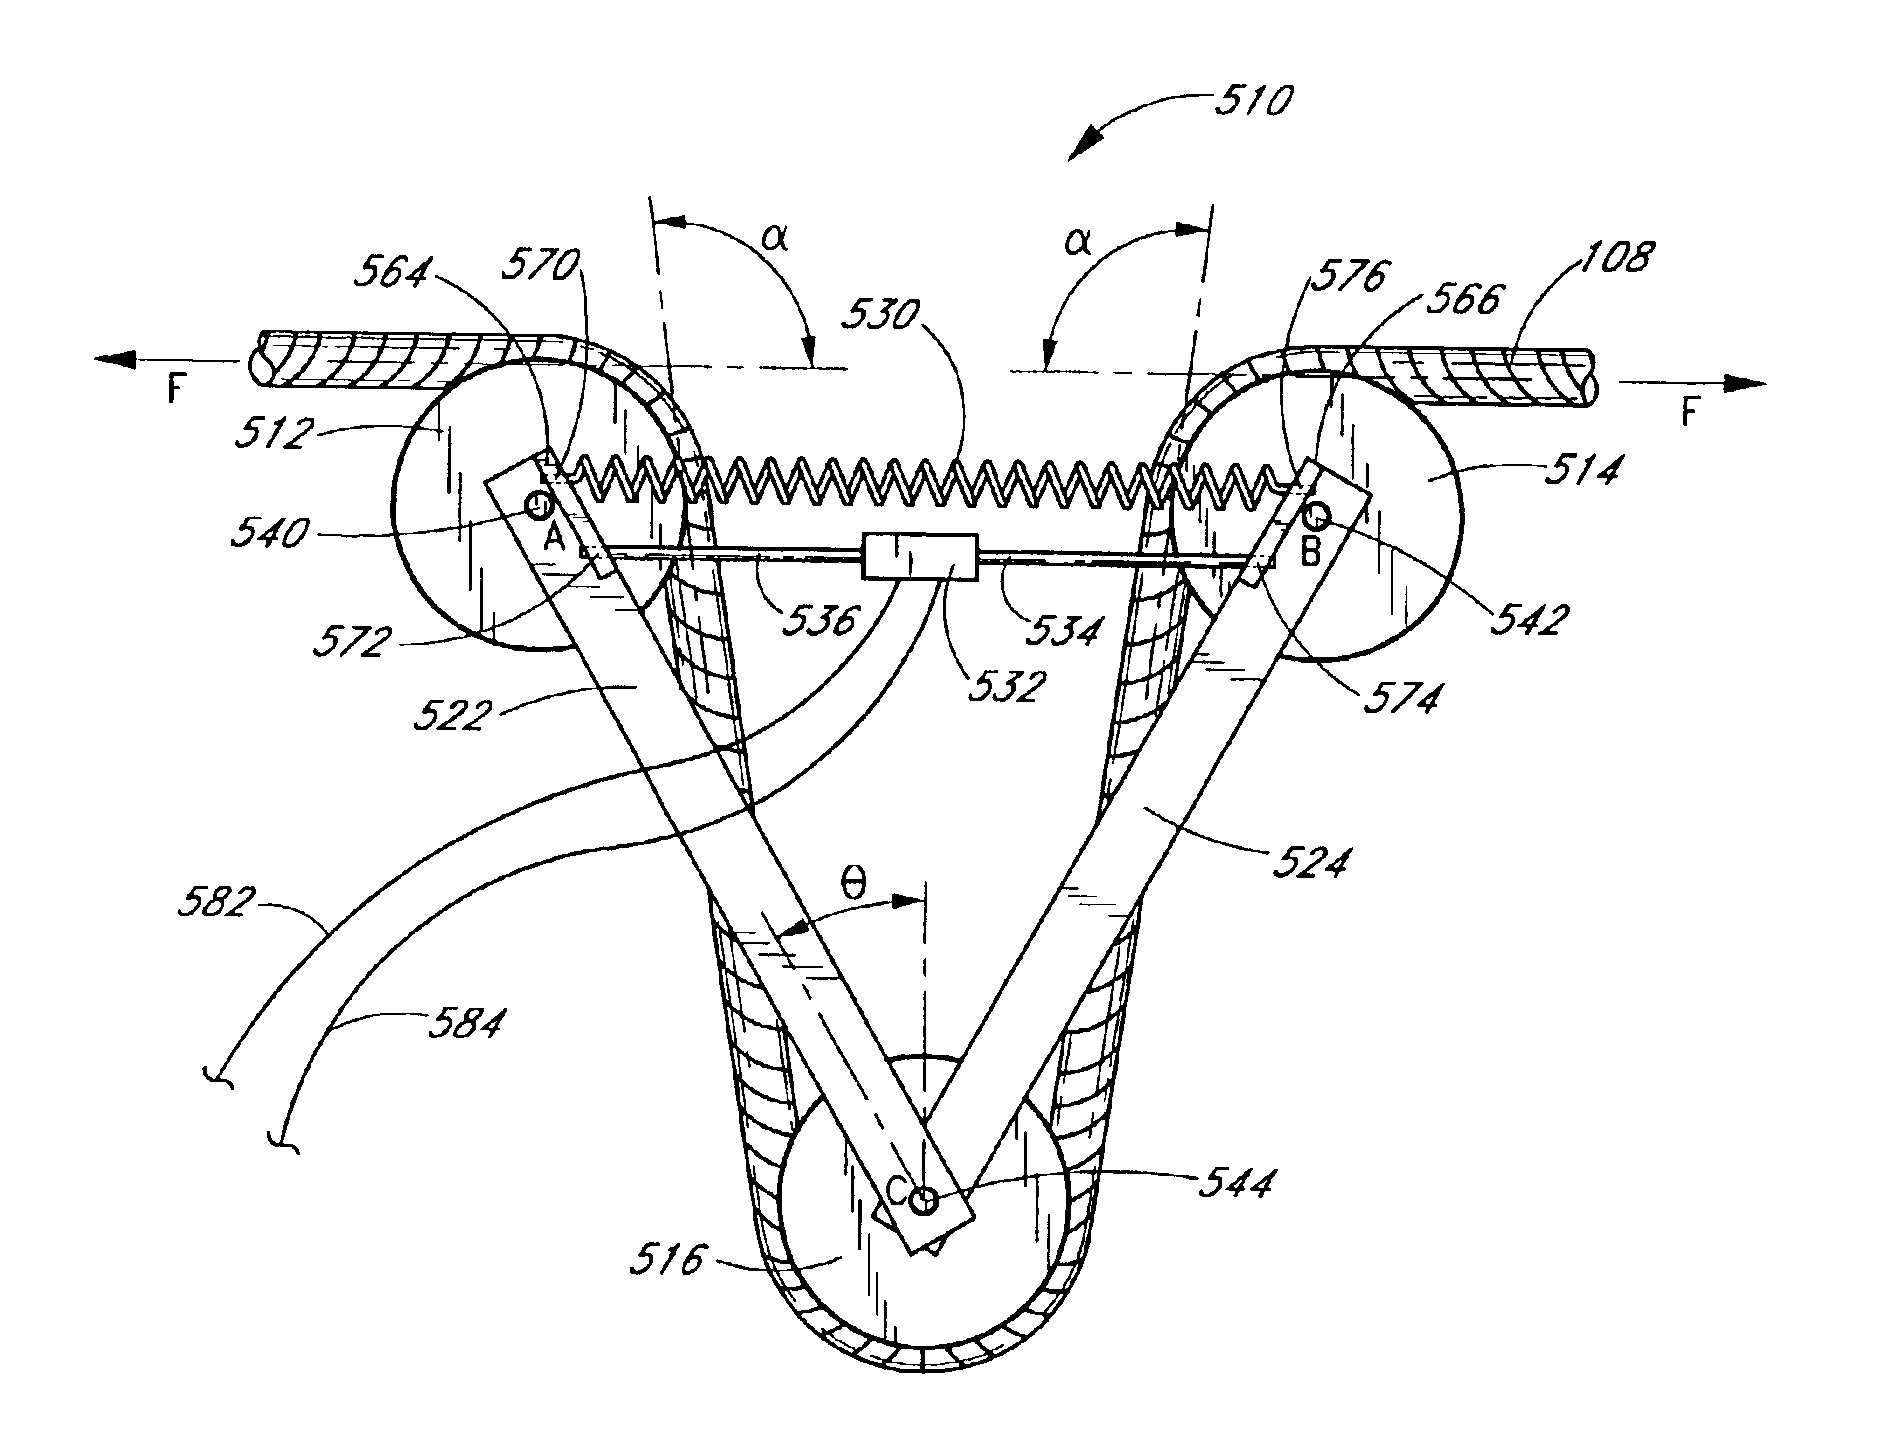 Tension measuring device for mooring line